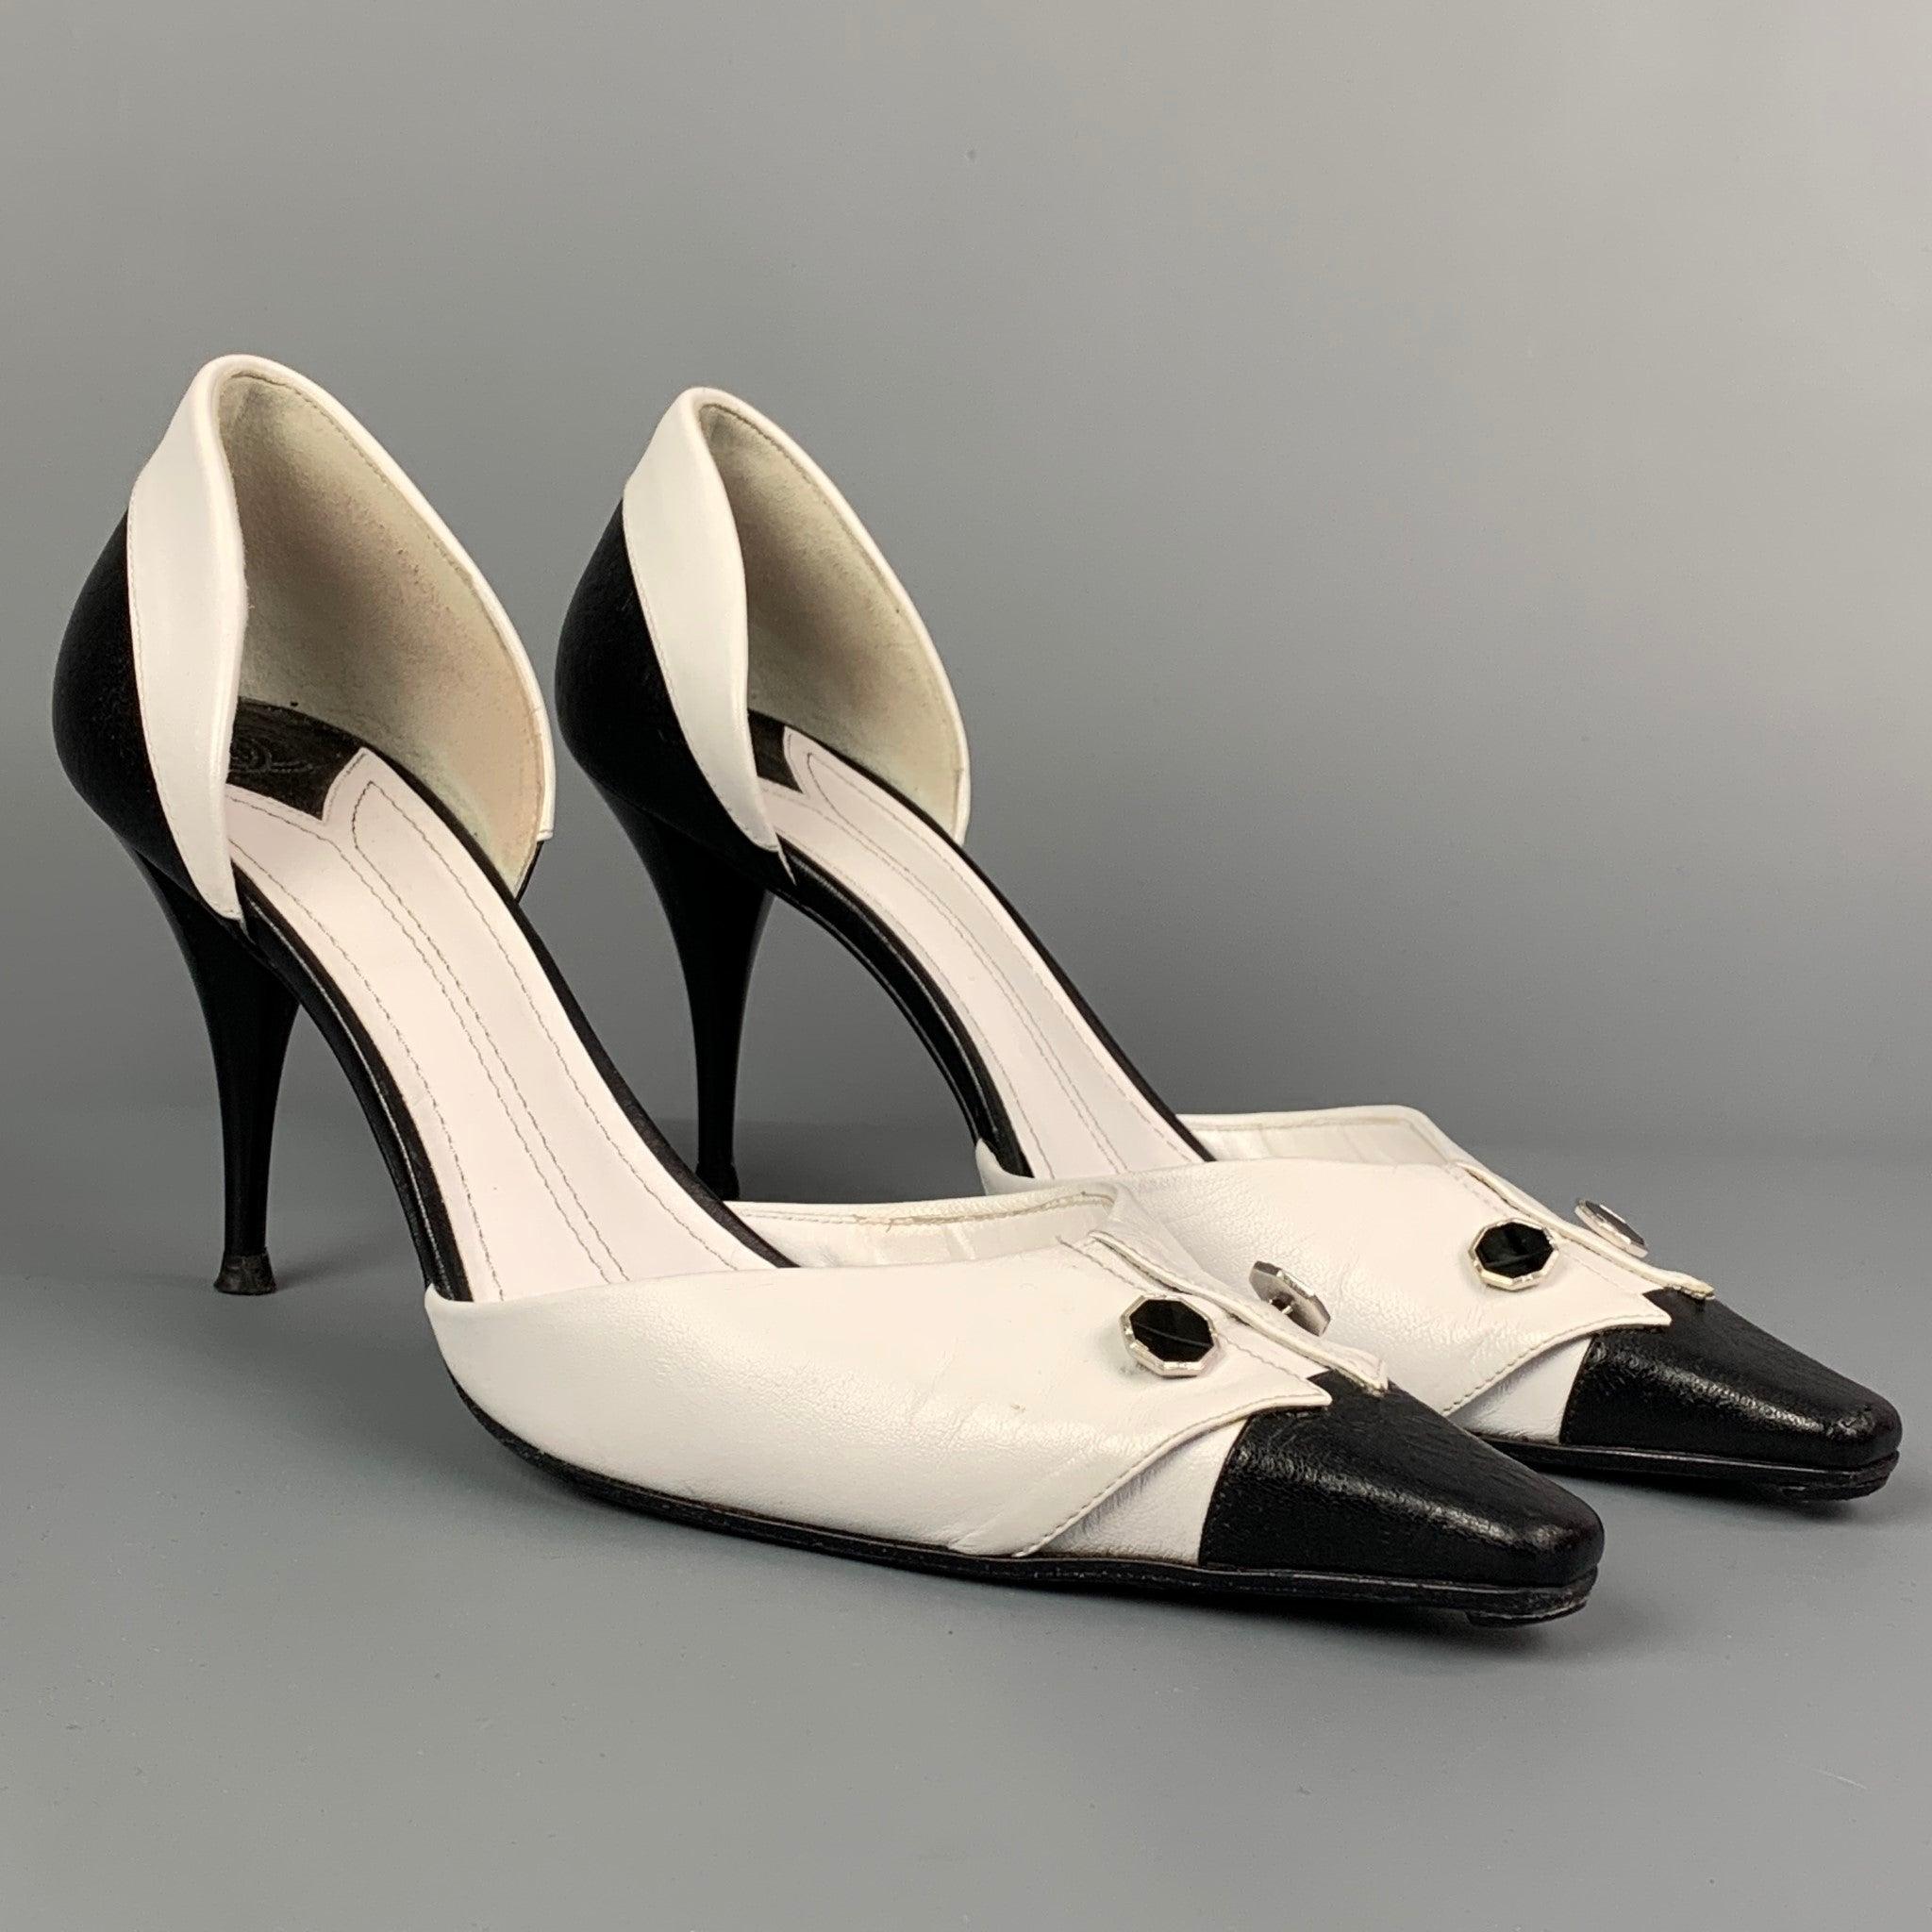 CHANEL pumps comes in a white & black two toned leather featuring a D'Orsay style, folded flap, silver button details, and a stiletto heel. Made in Italy.Very Good Pre-Owned Condition. 

Marked:   EU 40 

Measurements: 
  Heel: 3.5 inches 
  
  
